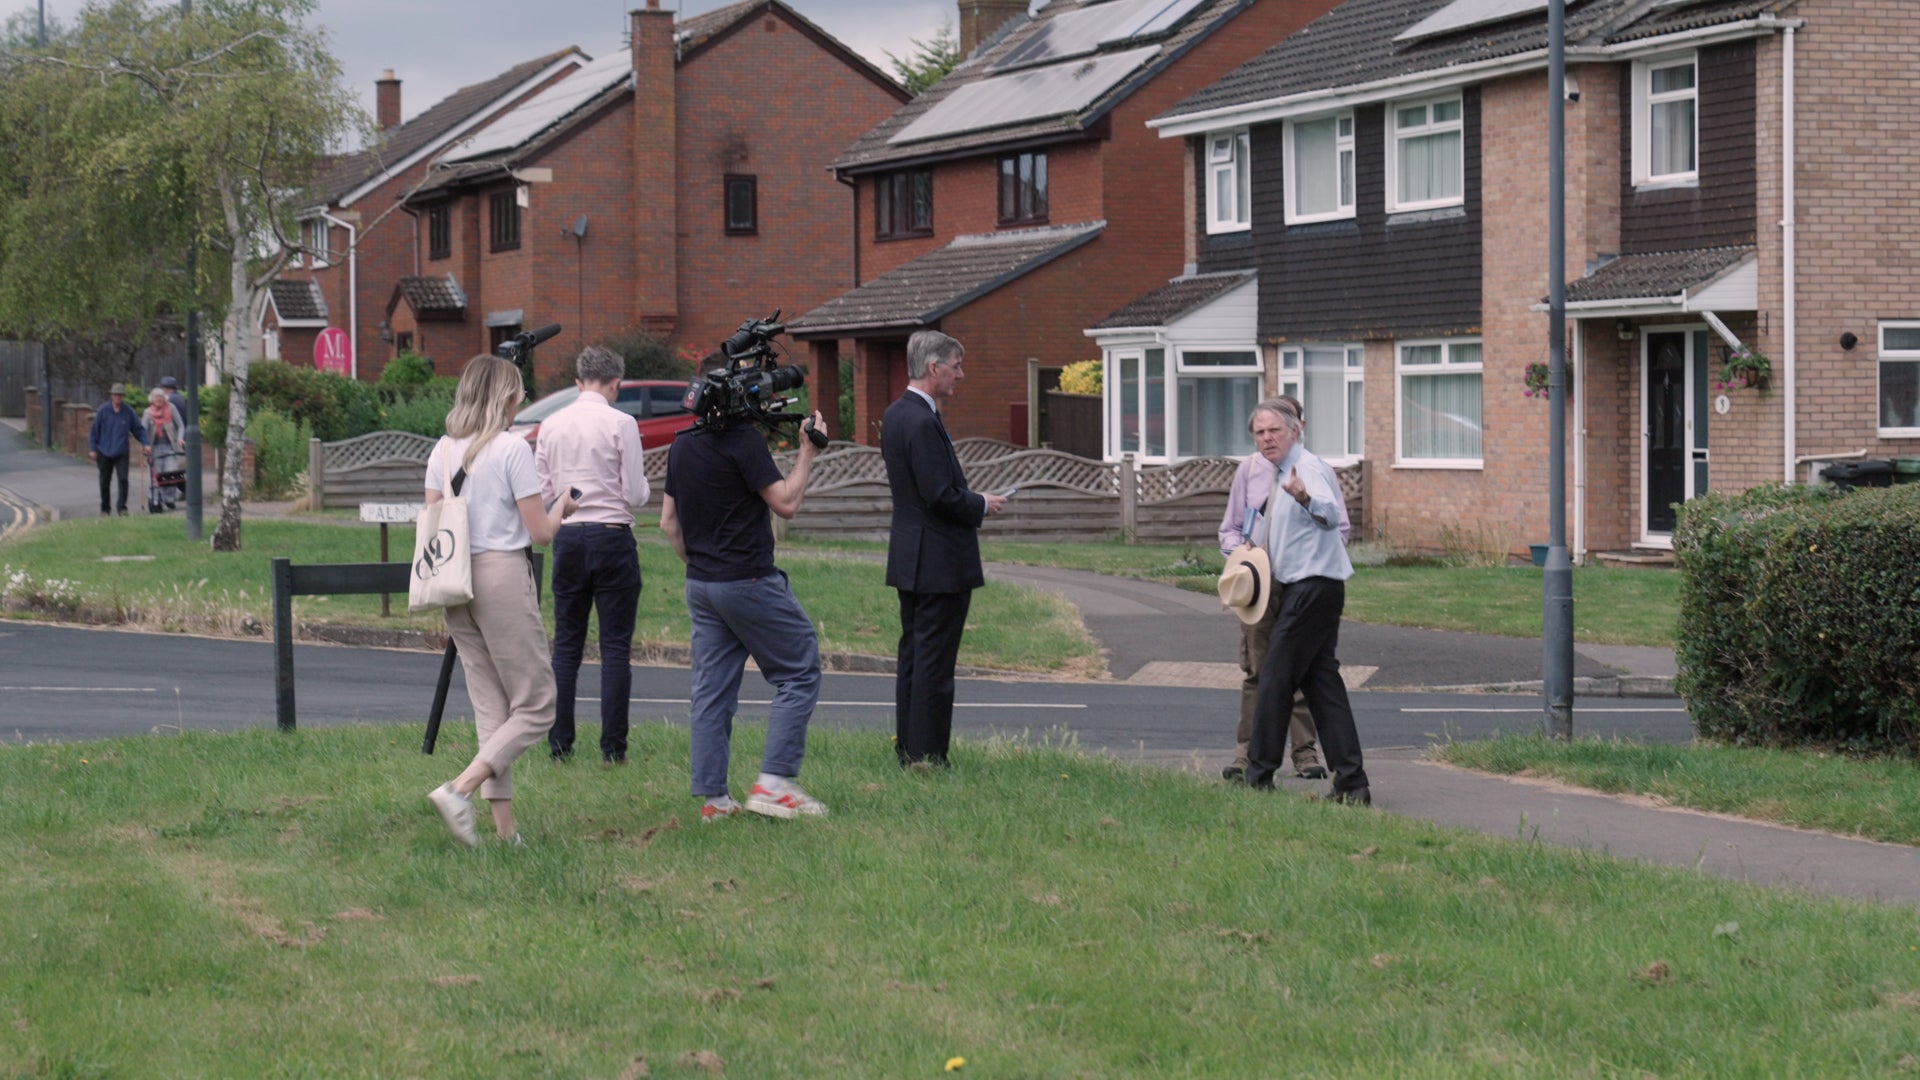 The film crew was with the Tory politician as he canvassed in Longwell Green last week